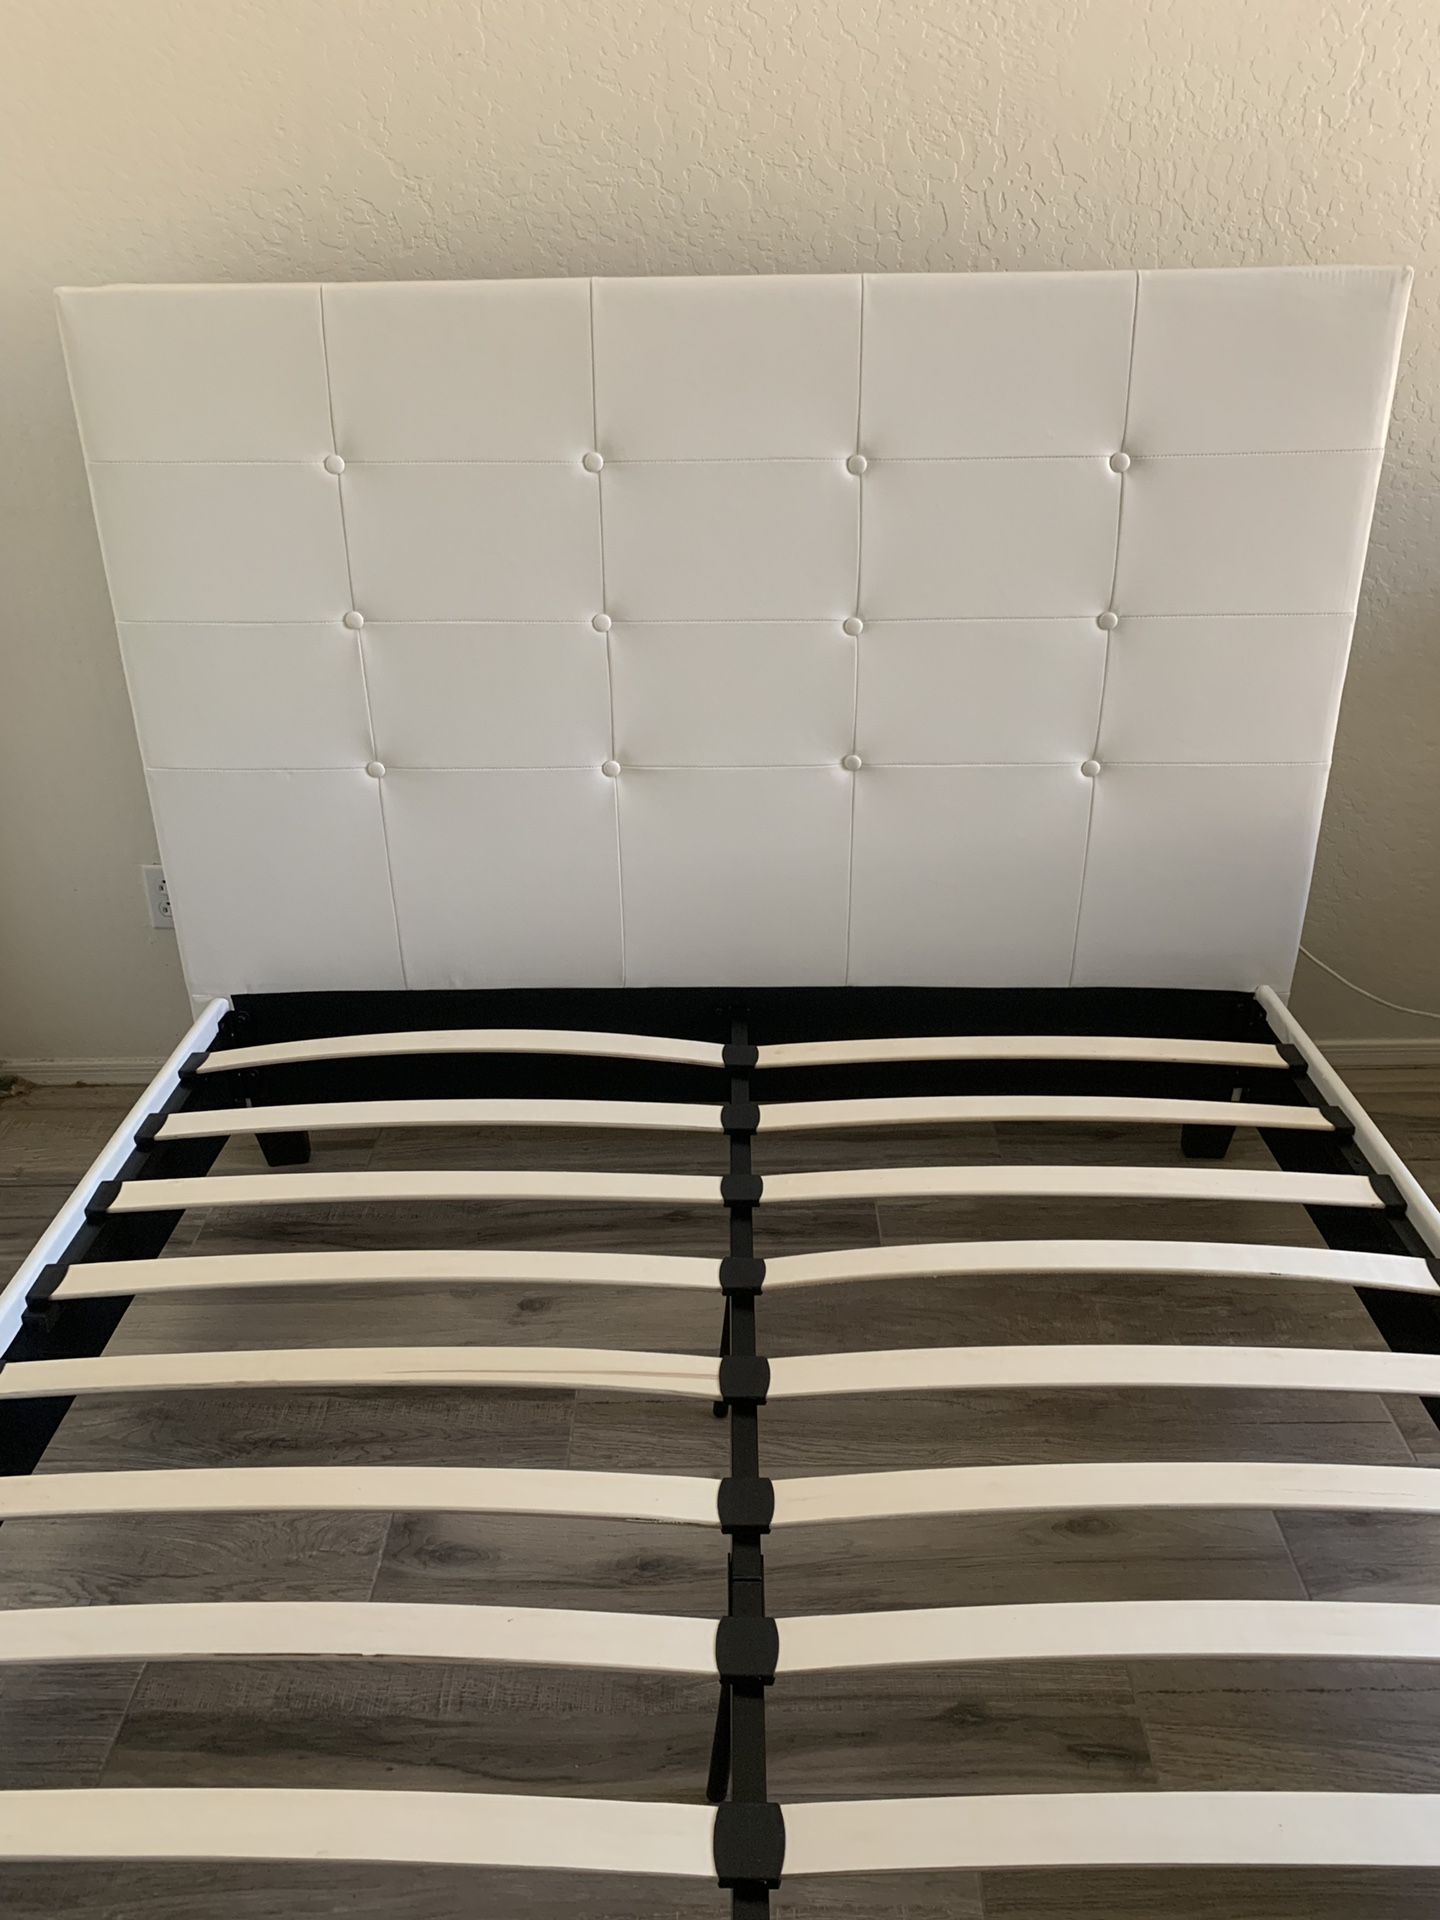 New Queen white leather bed frame in box